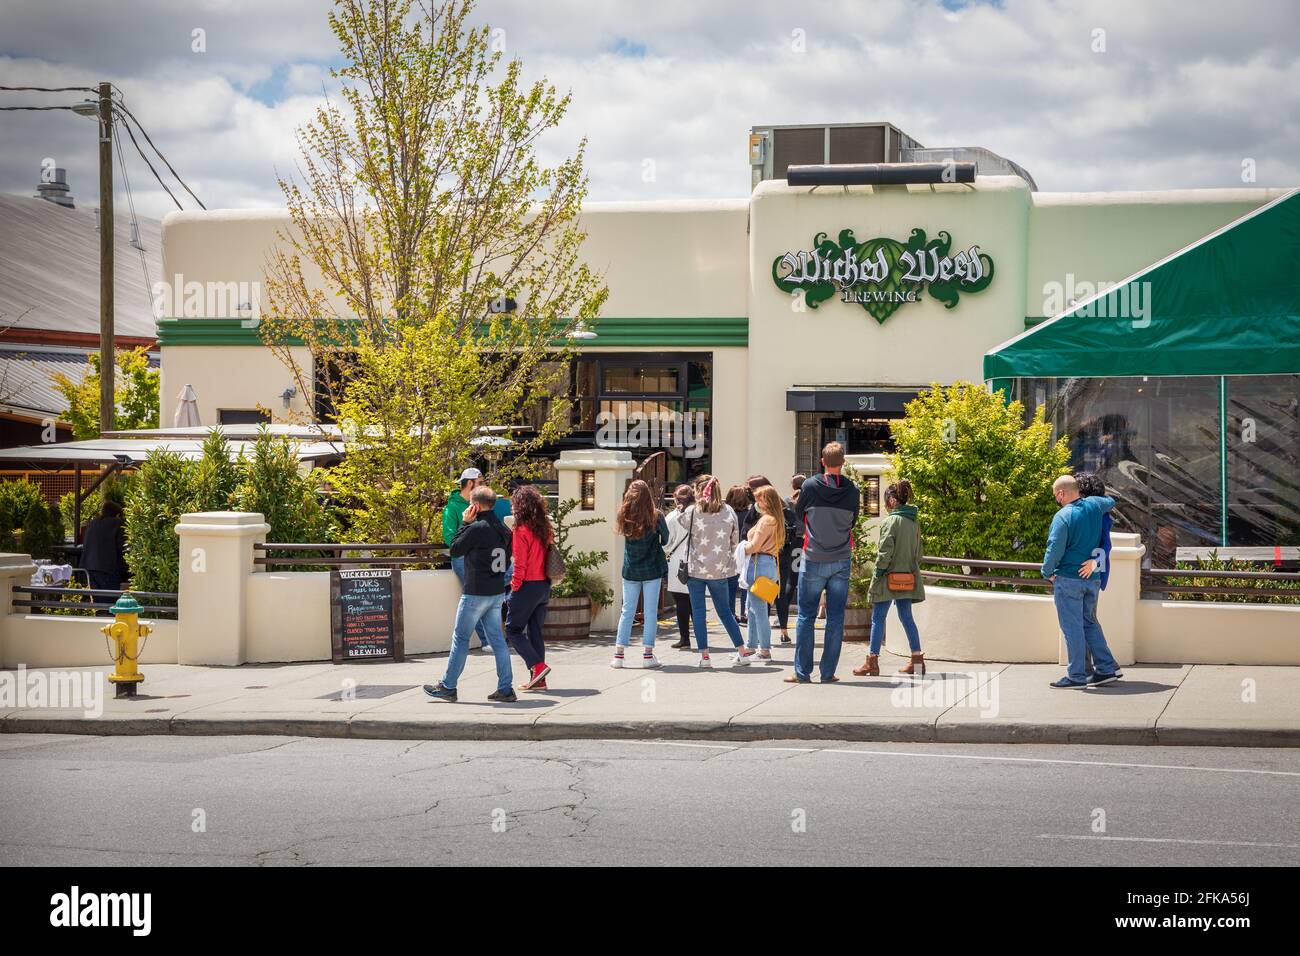 ASHEVILLE, NC, USA-25 APRIL 2021: The Wicked Weed Brewing Co. on Biltmore Ave. has a waiting line for lunch. Stock Photo